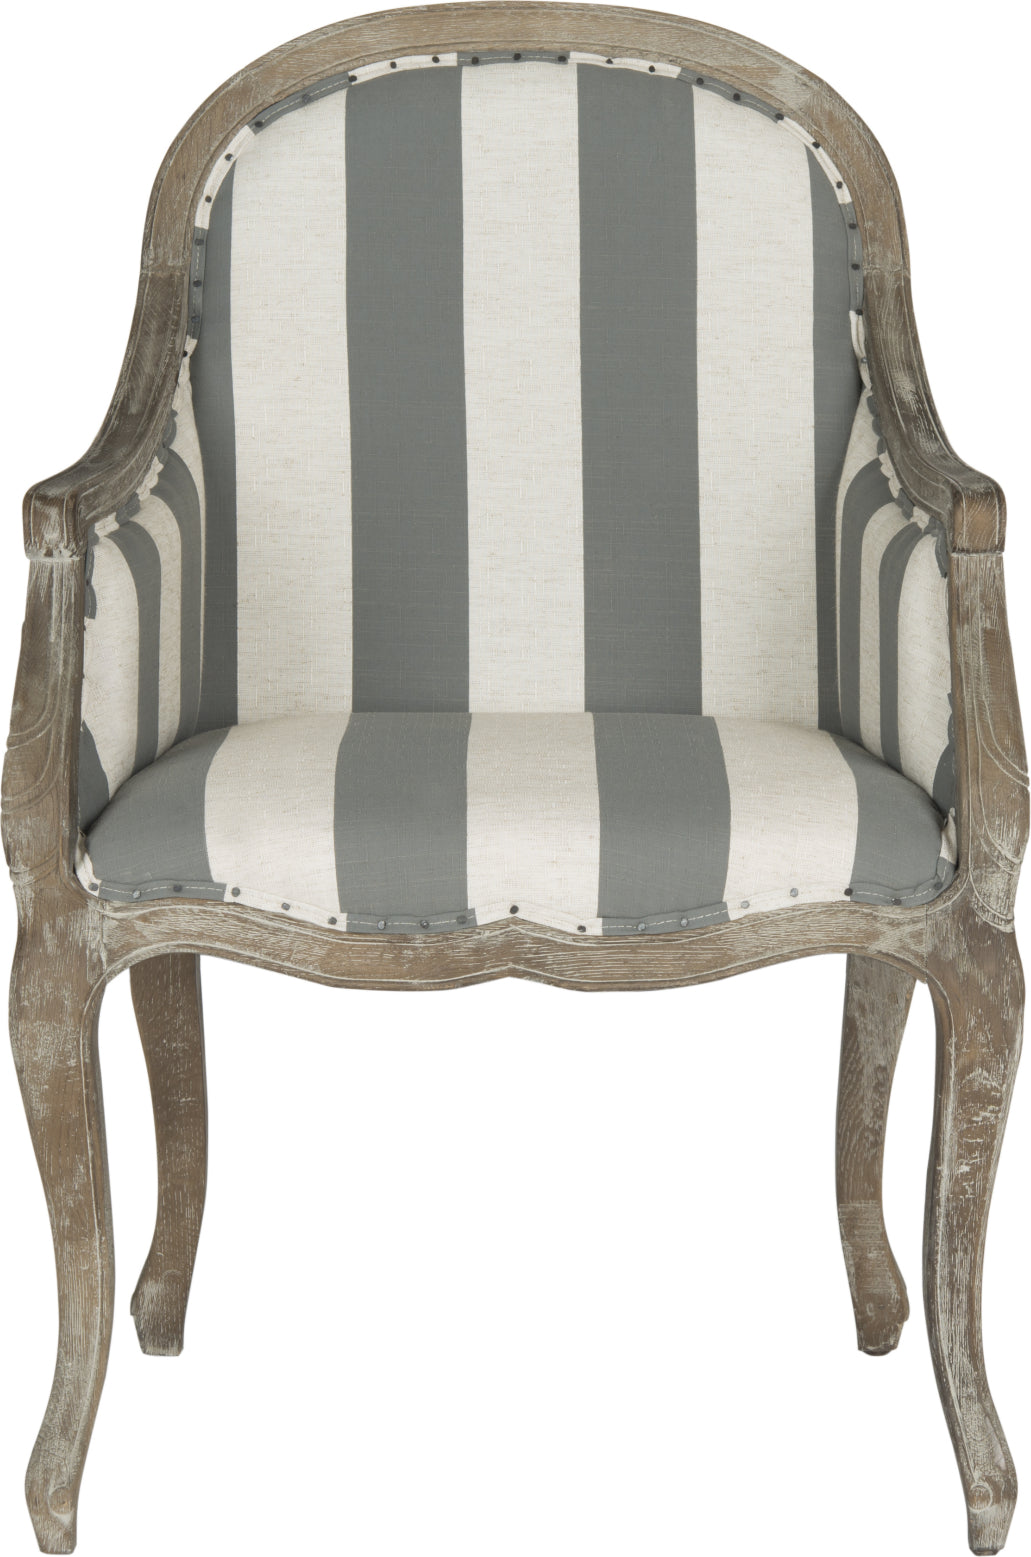 Safavieh Esther Arm Chair With Awning Stripes-Flat Black Nail Heads Grey and Off White Pickled Oak Furniture main image